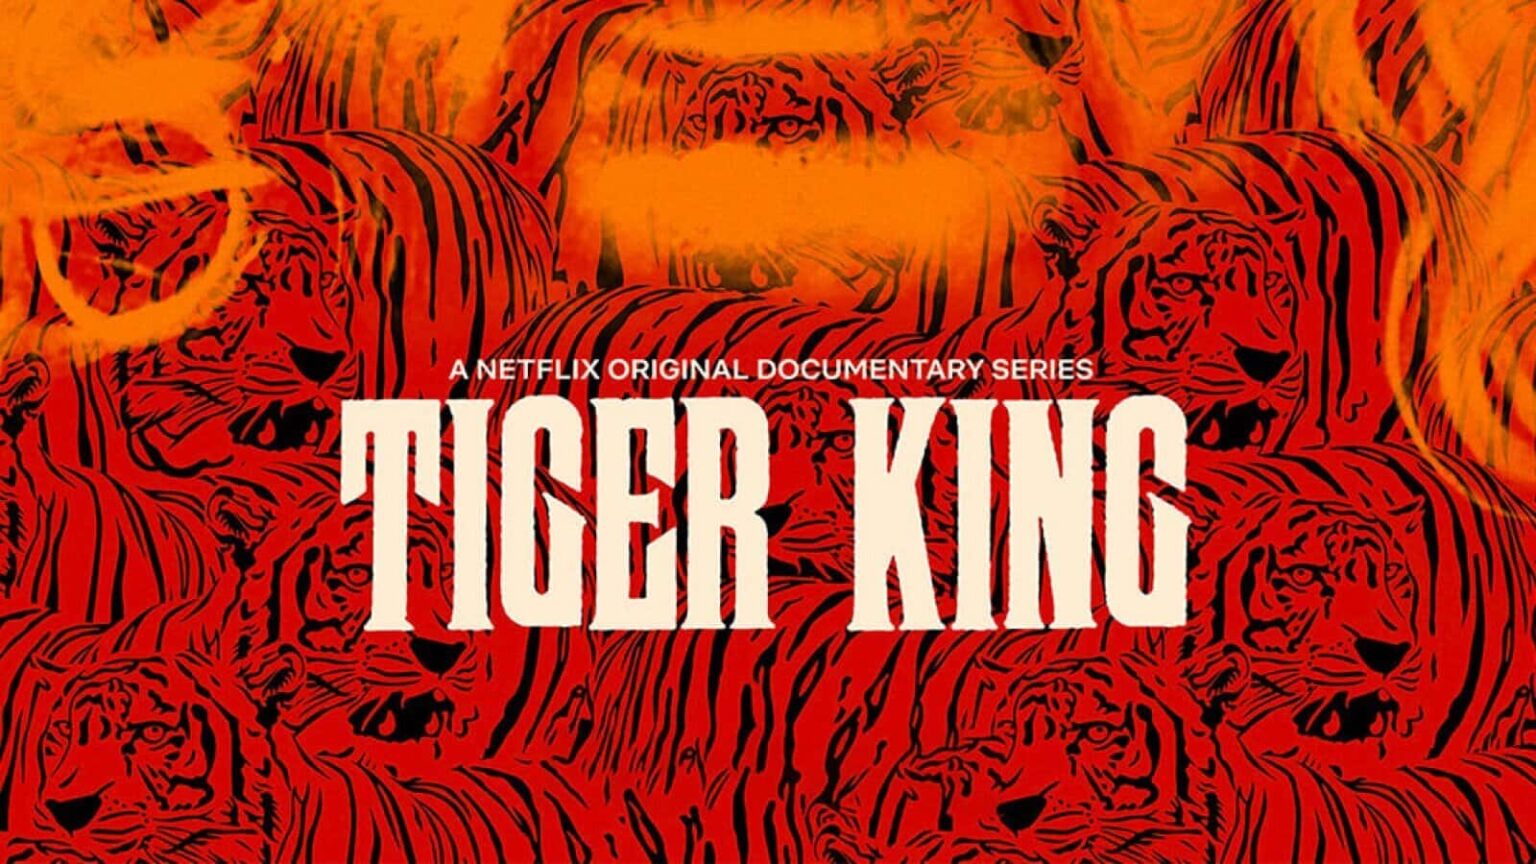 It's hard to believe that Netflix hit a gold mine as big as 'Tiger King'. Don't believe us? These insane quotes from just some of the cast prove it.